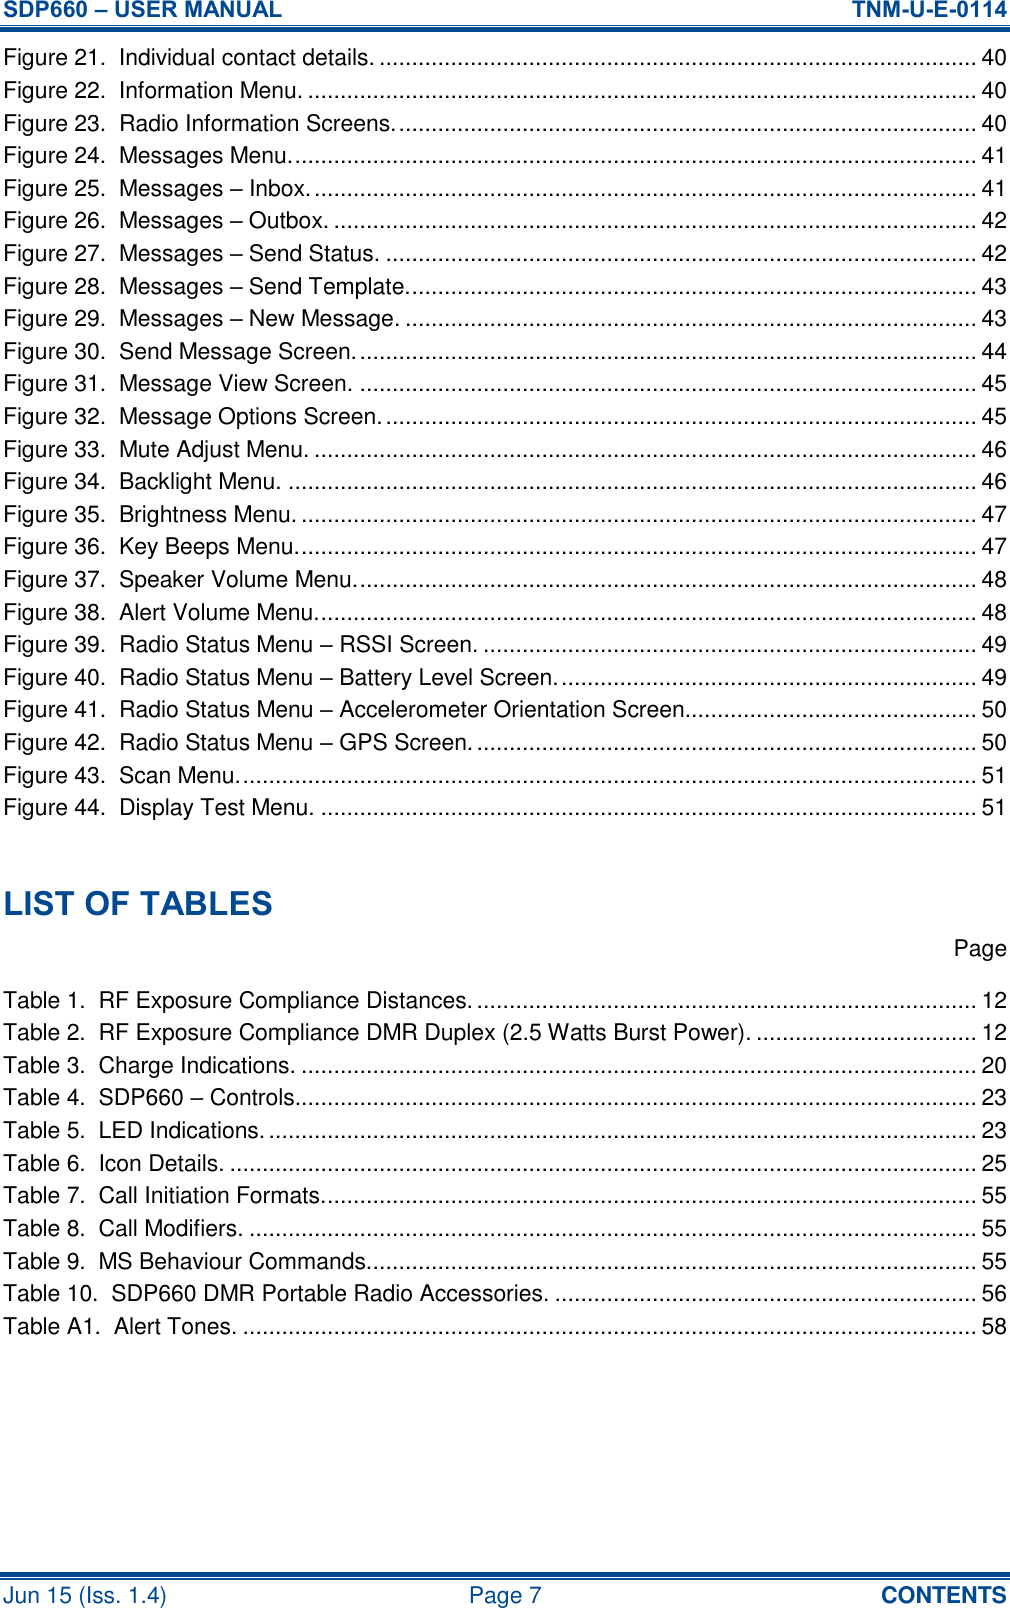 SDP660 – USER MANUAL  TNM-U-E-0114 Jun 15 (Iss. 1.4)  Page 7  CONTENTS Figure 21.  Individual contact details. ............................................................................................ 40 Figure 22.  Information Menu. ....................................................................................................... 40 Figure 23.  Radio Information Screens. ......................................................................................... 40 Figure 24.  Messages Menu. ......................................................................................................... 41 Figure 25.  Messages – Inbox. ...................................................................................................... 41 Figure 26.  Messages – Outbox. ................................................................................................... 42 Figure 27.  Messages – Send Status. ........................................................................................... 42 Figure 28.  Messages – Send Template. ....................................................................................... 43 Figure 29.  Messages – New Message. ........................................................................................ 43 Figure 30.  Send Message Screen. ............................................................................................... 44 Figure 31.  Message View Screen. ............................................................................................... 45 Figure 32.  Message Options Screen. ........................................................................................... 45 Figure 33.  Mute Adjust Menu. ...................................................................................................... 46 Figure 34.  Backlight Menu. .......................................................................................................... 46 Figure 35.  Brightness Menu. ........................................................................................................ 47 Figure 36.  Key Beeps Menu. ........................................................................................................ 47 Figure 37.  Speaker Volume Menu. ............................................................................................... 48 Figure 38.  Alert Volume Menu. ..................................................................................................... 48 Figure 39.  Radio Status Menu – RSSI Screen. ............................................................................ 49 Figure 40.  Radio Status Menu – Battery Level Screen. ................................................................ 49 Figure 41.  Radio Status Menu – Accelerometer Orientation Screen............................................. 50 Figure 42.  Radio Status Menu – GPS Screen. ............................................................................. 50 Figure 43.  Scan Menu. ................................................................................................................. 51 Figure 44.  Display Test Menu. ..................................................................................................... 51  LIST OF TABLES   Page Table 1.  RF Exposure Compliance Distances. ............................................................................. 12 Table 2.  RF Exposure Compliance DMR Duplex (2.5 Watts Burst Power). .................................. 12 Table 3.  Charge Indications. ........................................................................................................ 20 Table 4.  SDP660 – Controls......................................................................................................... 23 Table 5.  LED Indications. ............................................................................................................. 23 Table 6.  Icon Details. ................................................................................................................... 25 Table 7.  Call Initiation Formats. .................................................................................................... 55 Table 8.  Call Modifiers. ................................................................................................................ 55 Table 9.  MS Behaviour Commands. ............................................................................................. 55 Table 10.  SDP660 DMR Portable Radio Accessories. ................................................................. 56 Table A1.  Alert Tones. ................................................................................................................. 58    